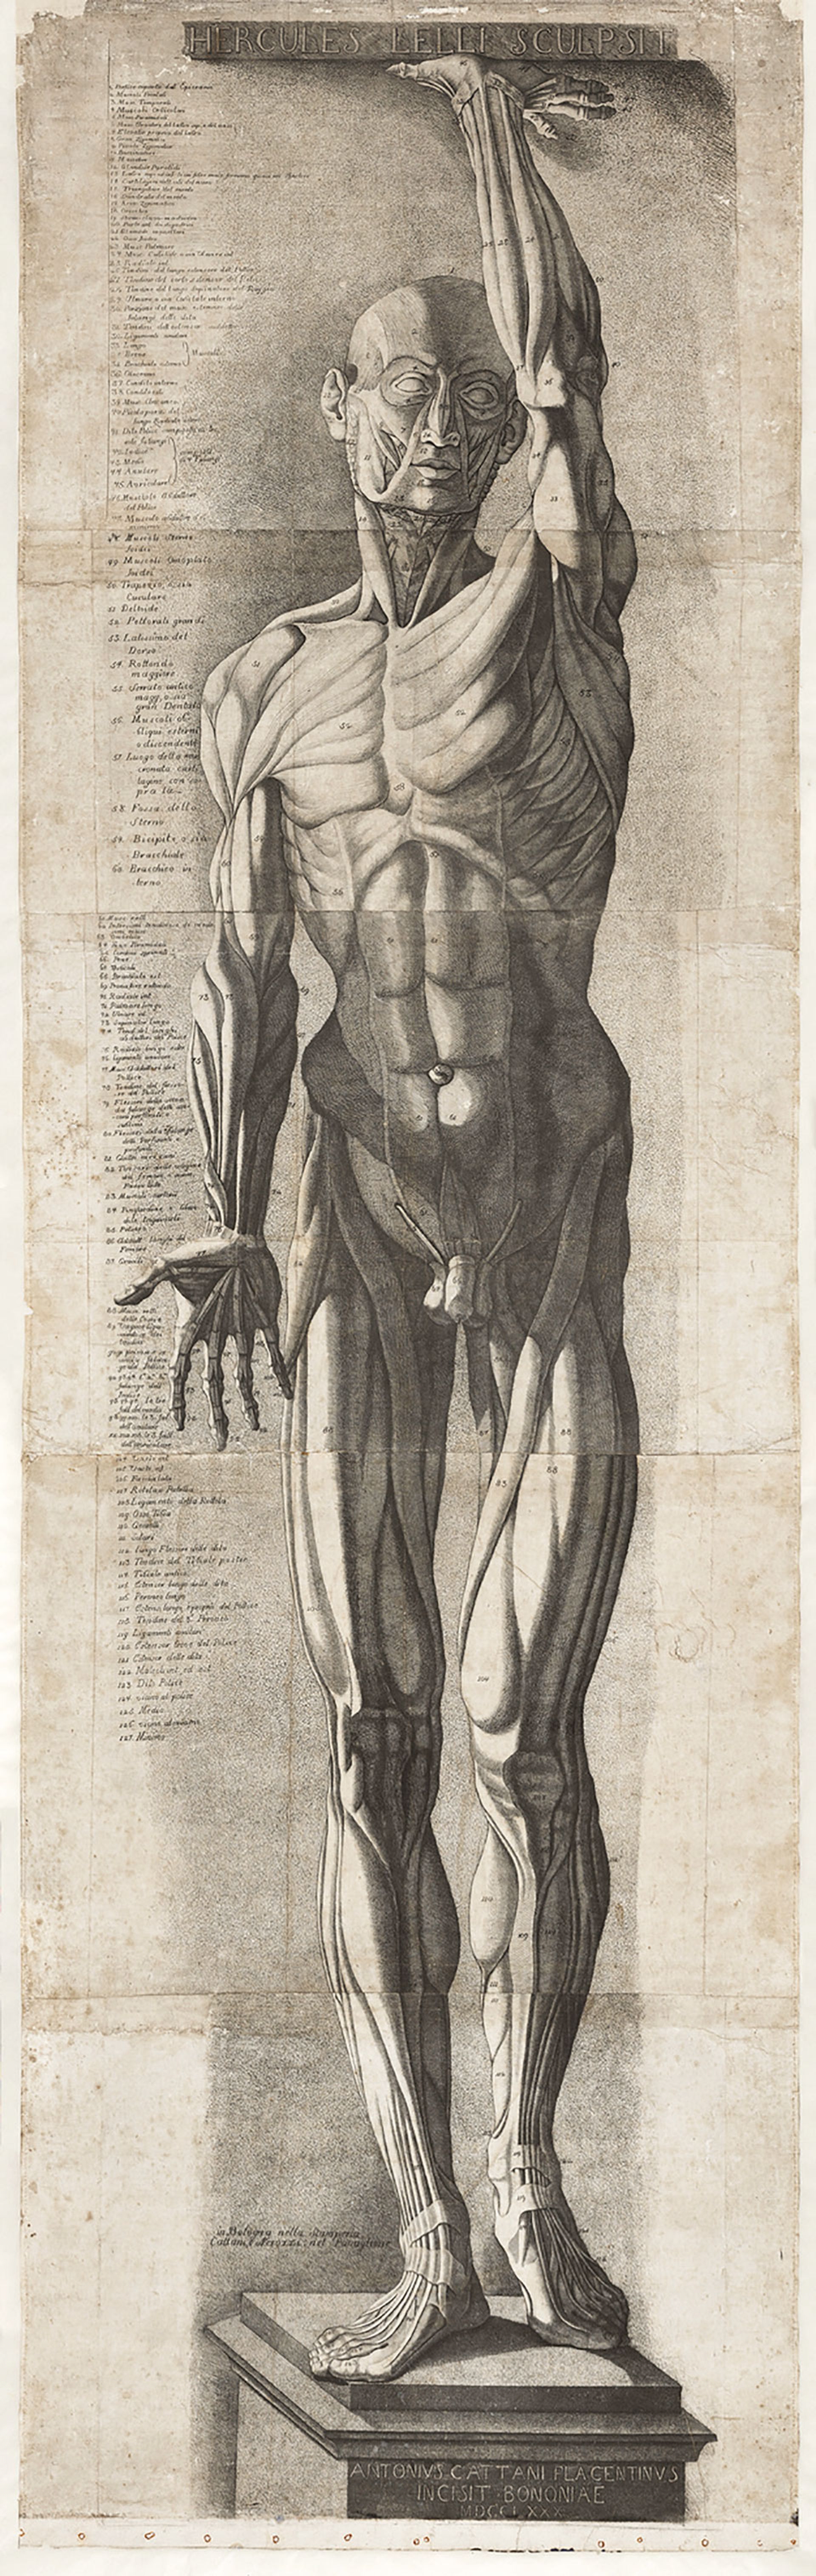 Antonio Cattani (active 1777-around 1790) after Ercole Lelli (1702-66), Écorché figure (1780), etching and engraving, printed on five sheets Getty Research Institute